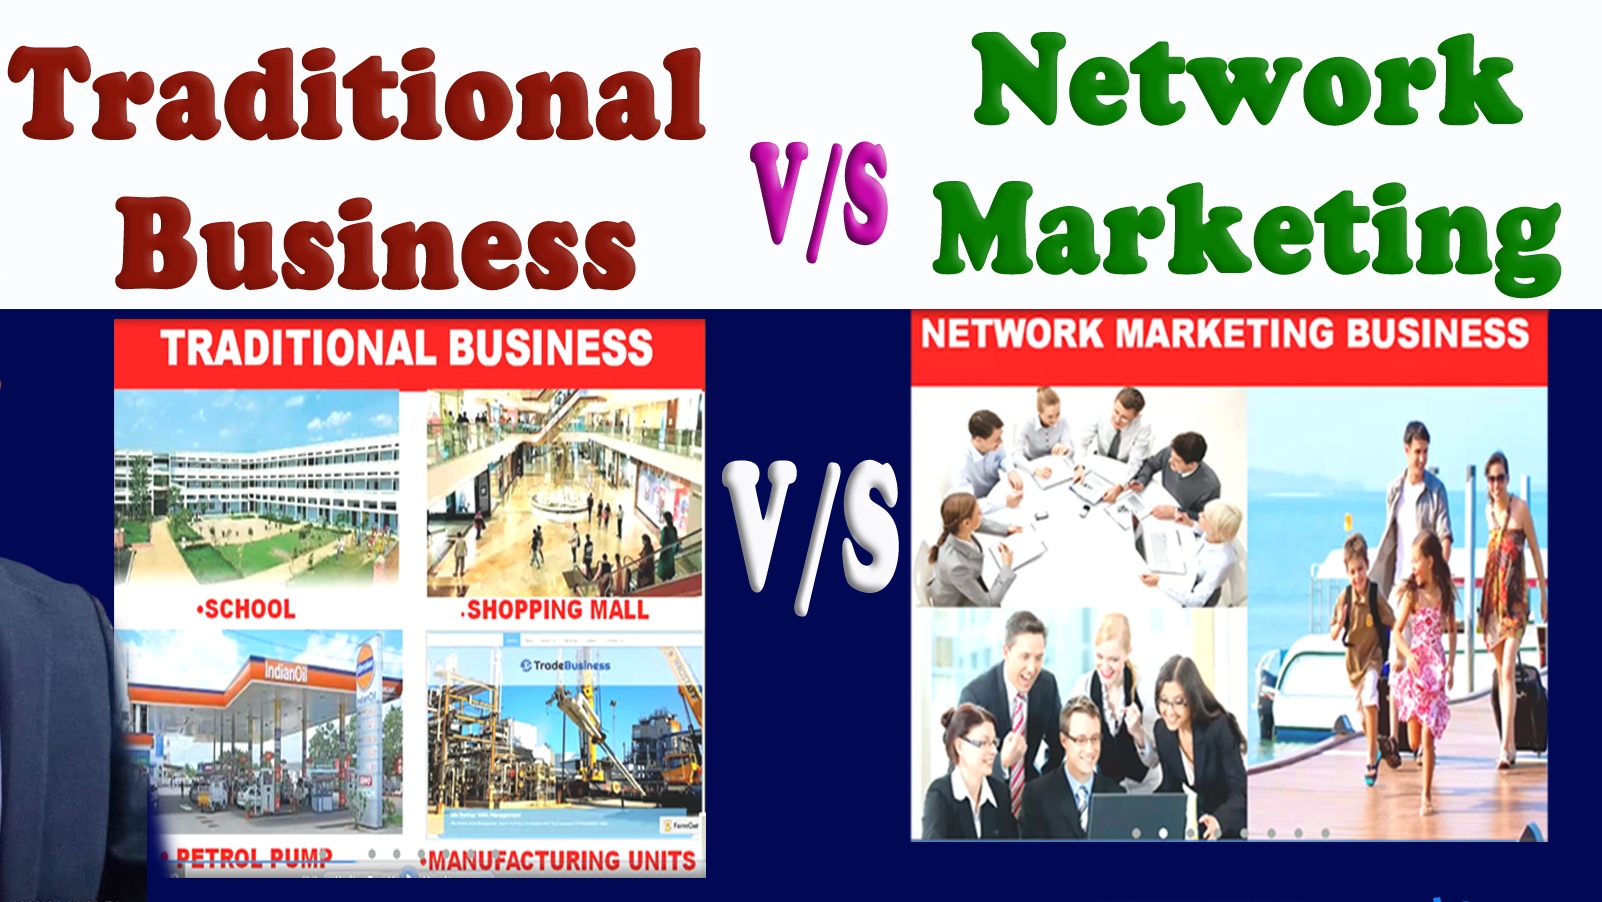 Network Marketing vs. Traditional Business: Which is Right for You?